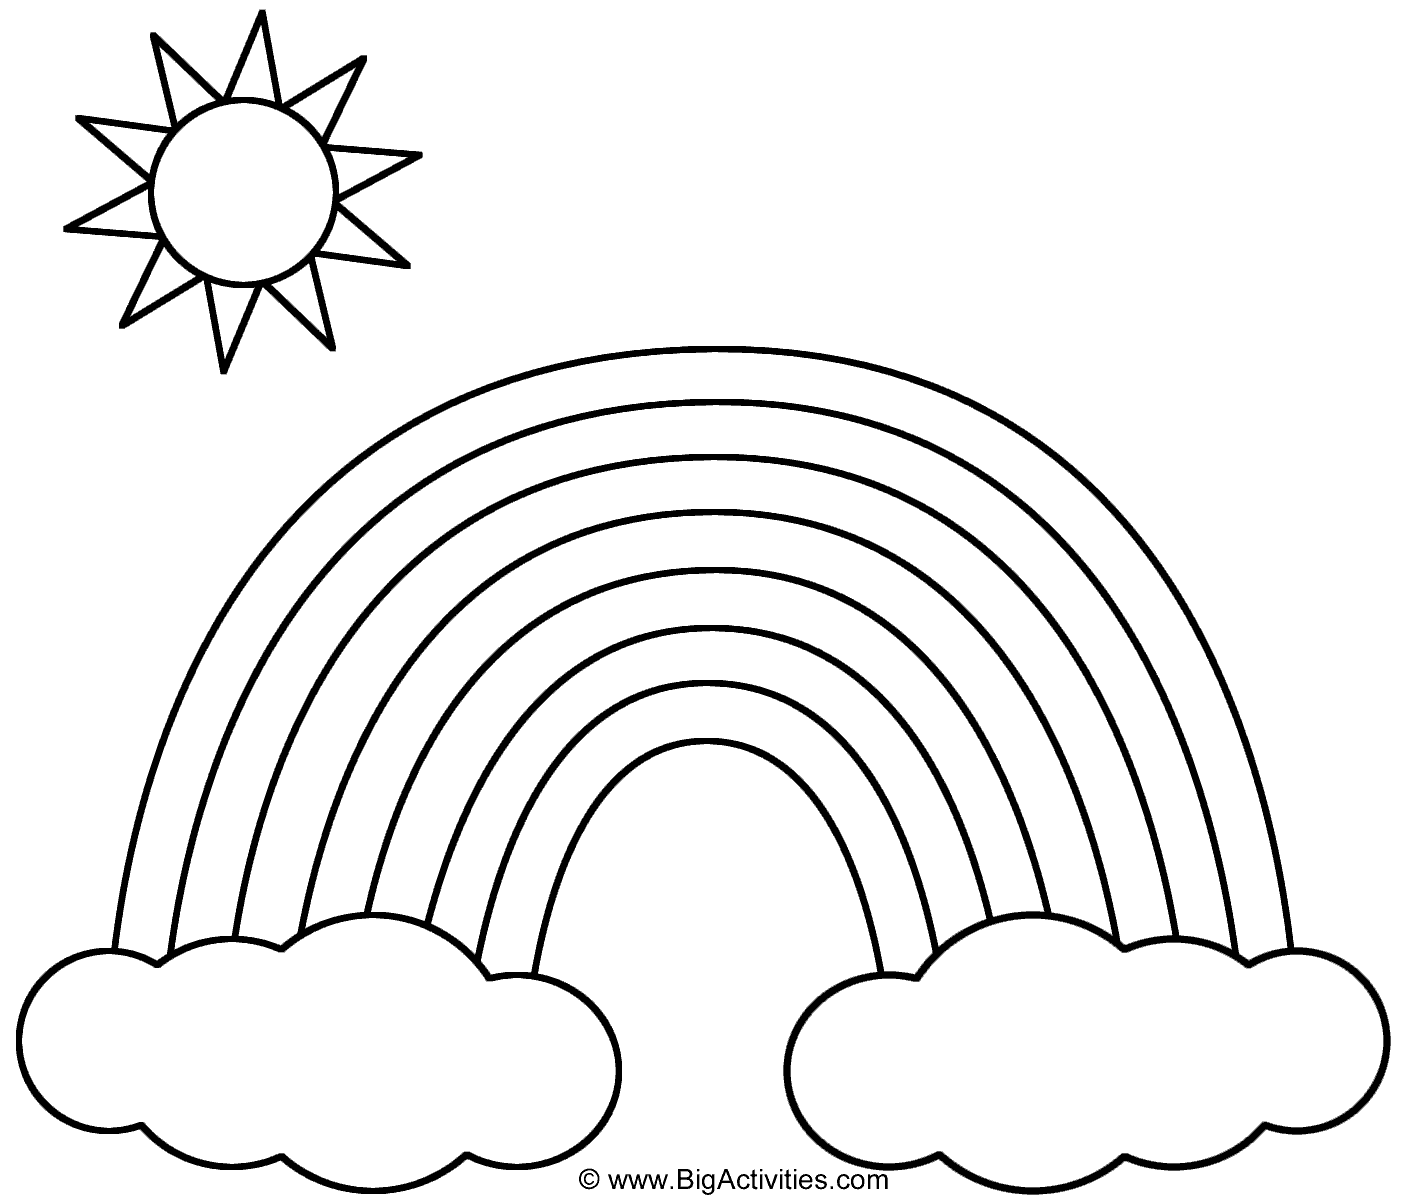 88 Rainbow Coloring Pages Pdf Download Free Images